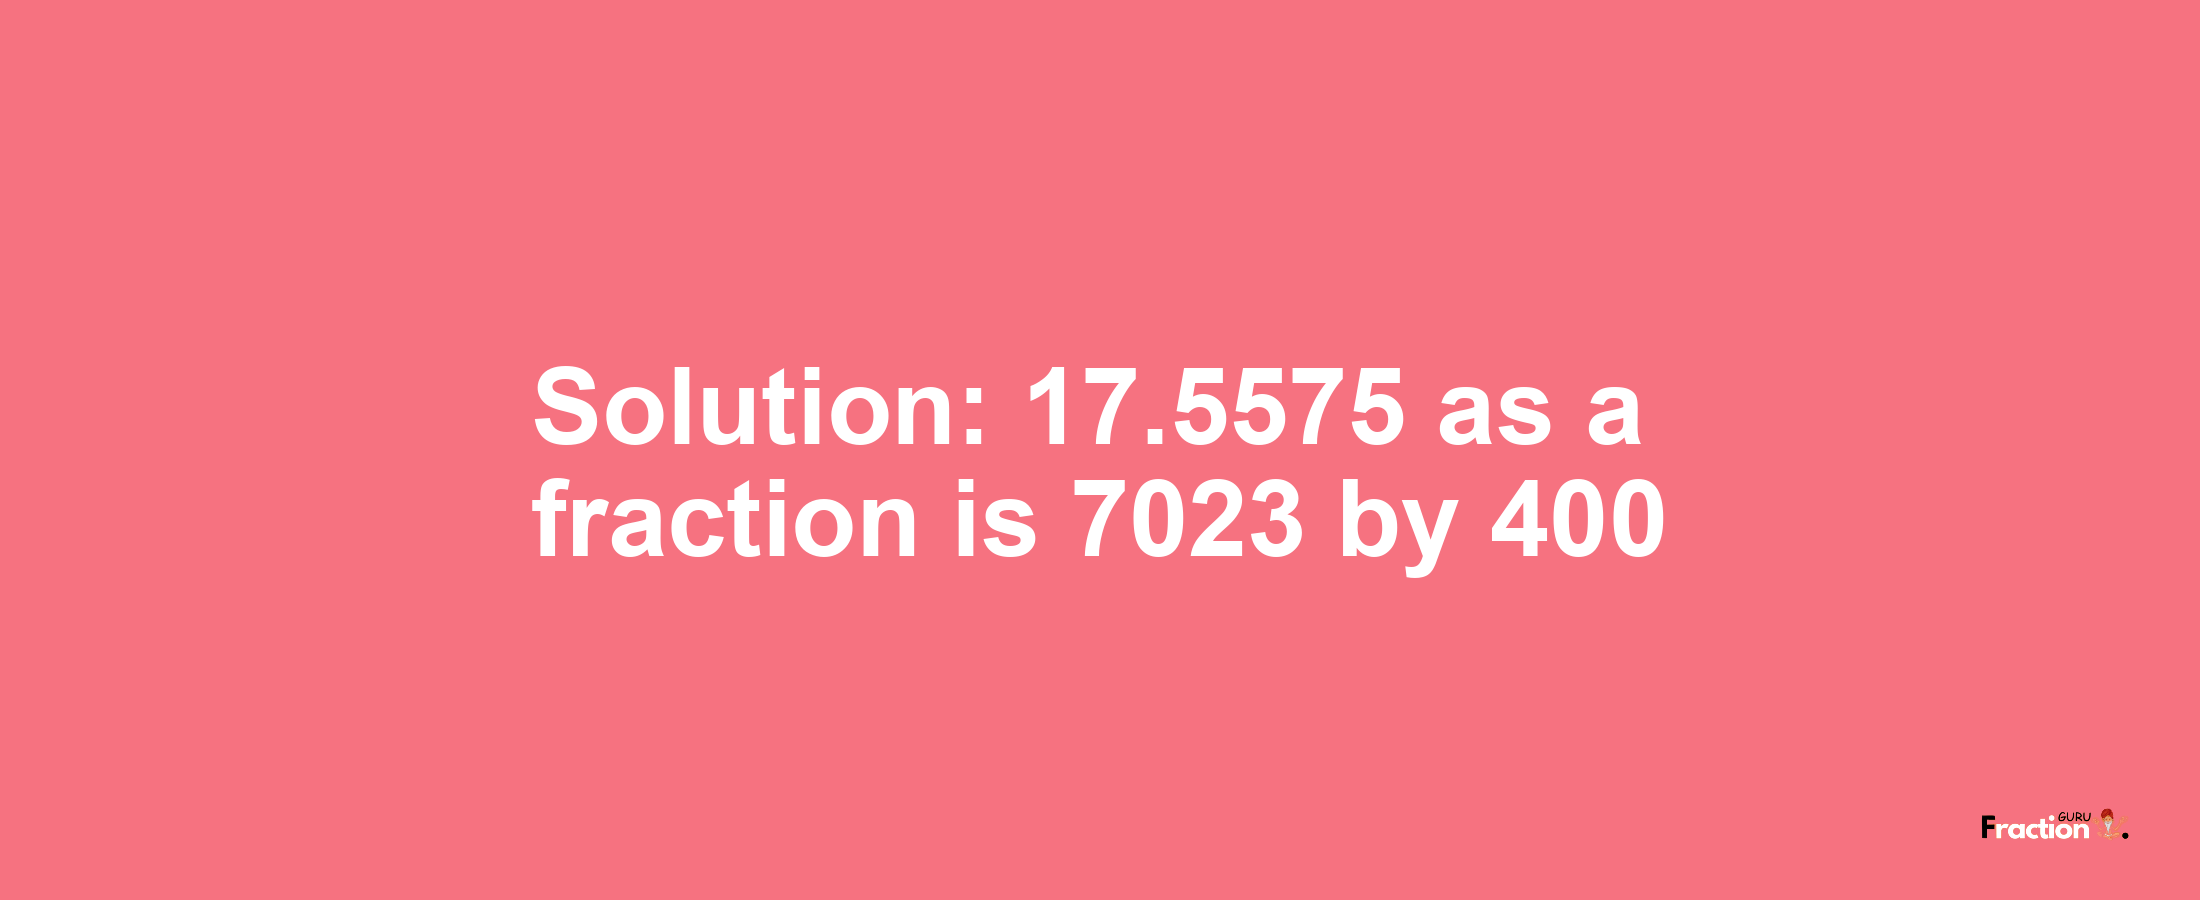 Solution:17.5575 as a fraction is 7023/400